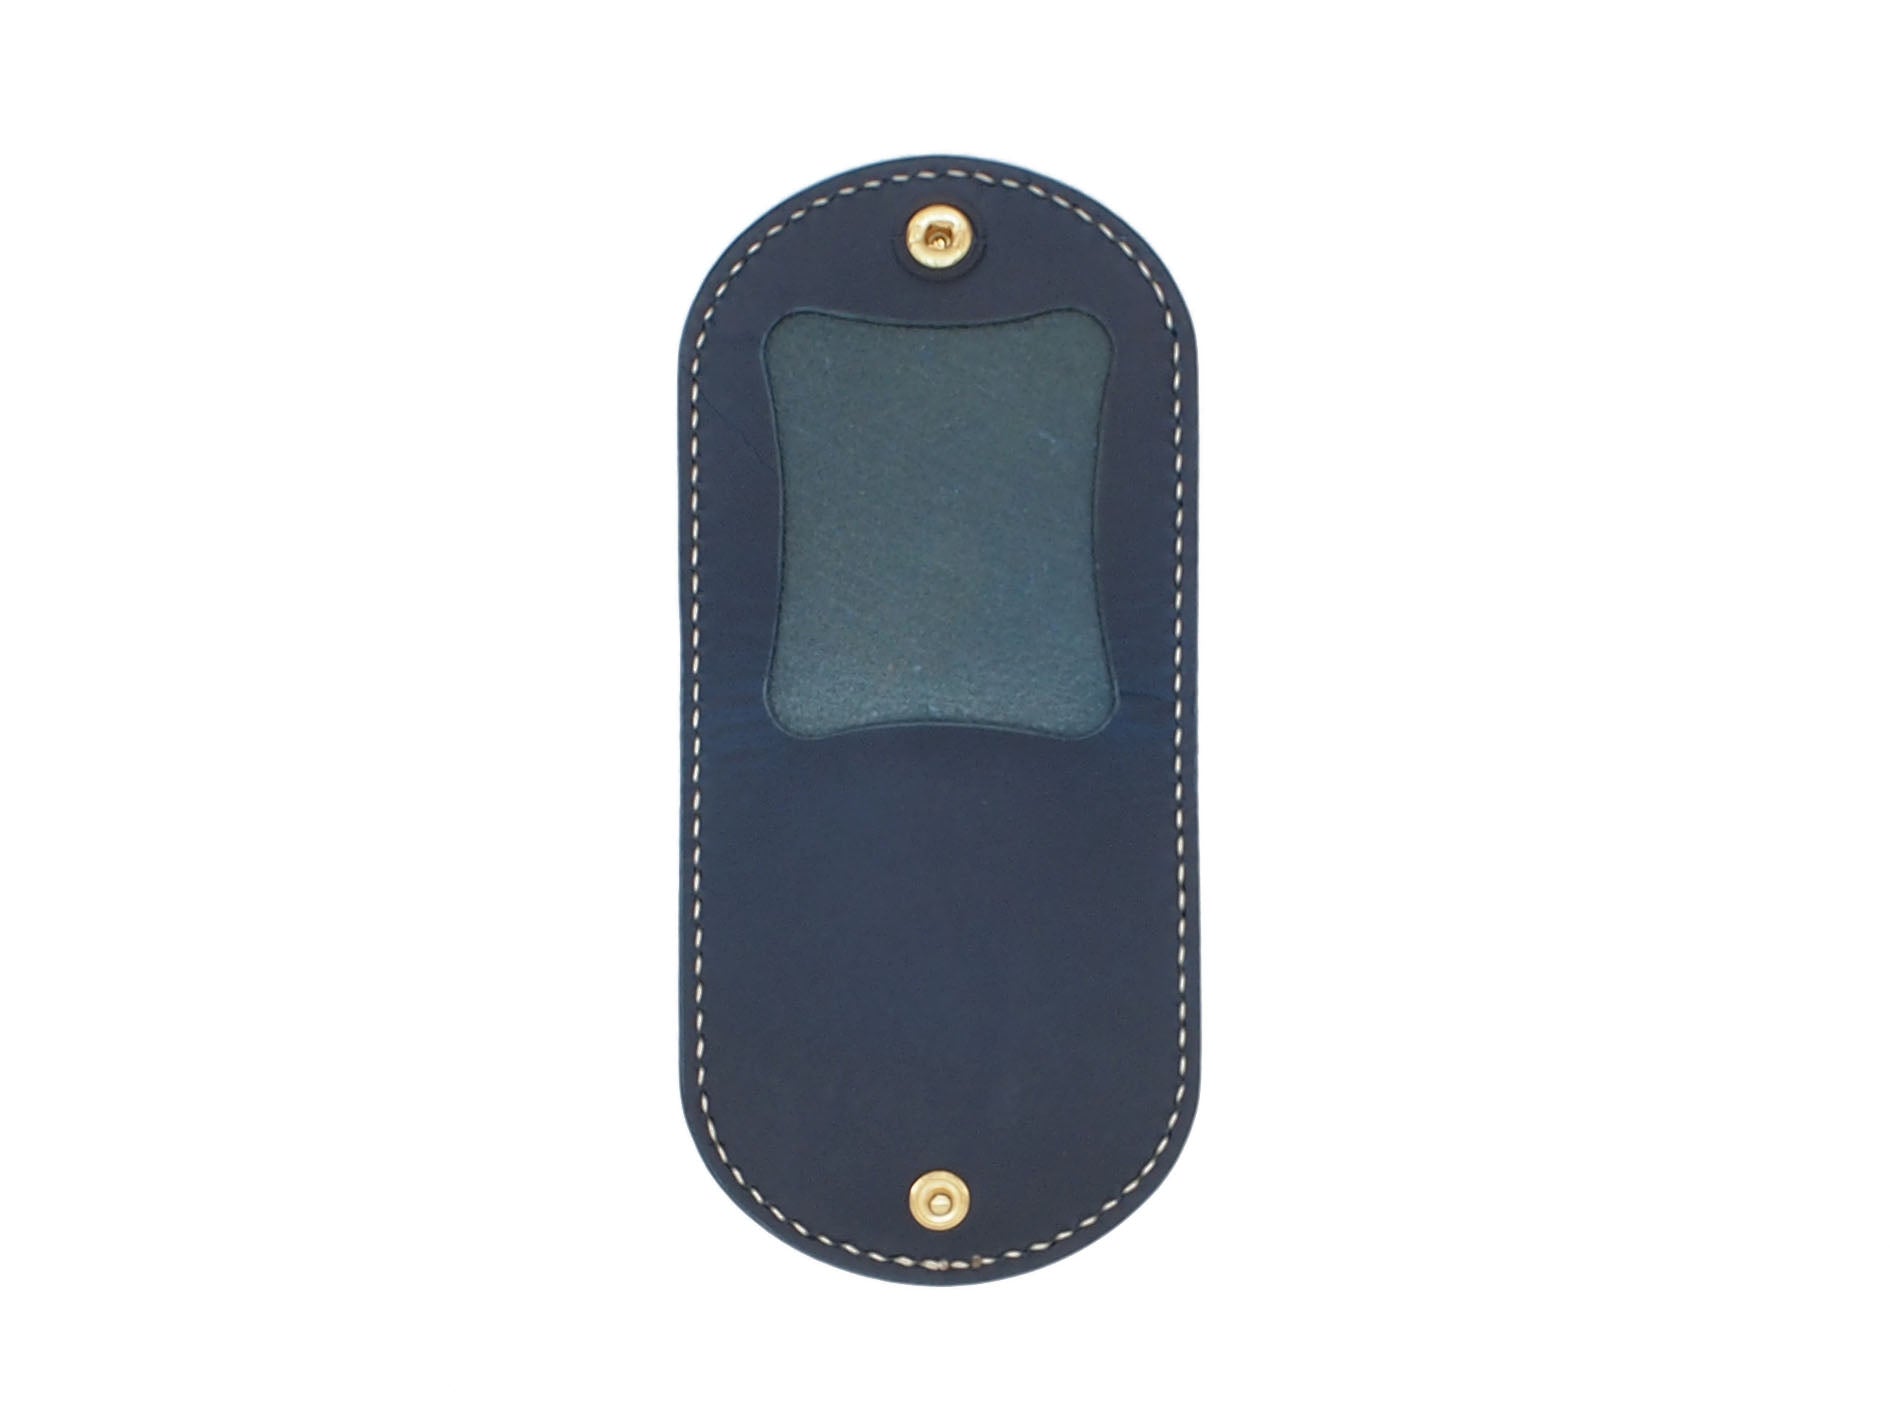 Guardian - Coin Case In Blue Buttero